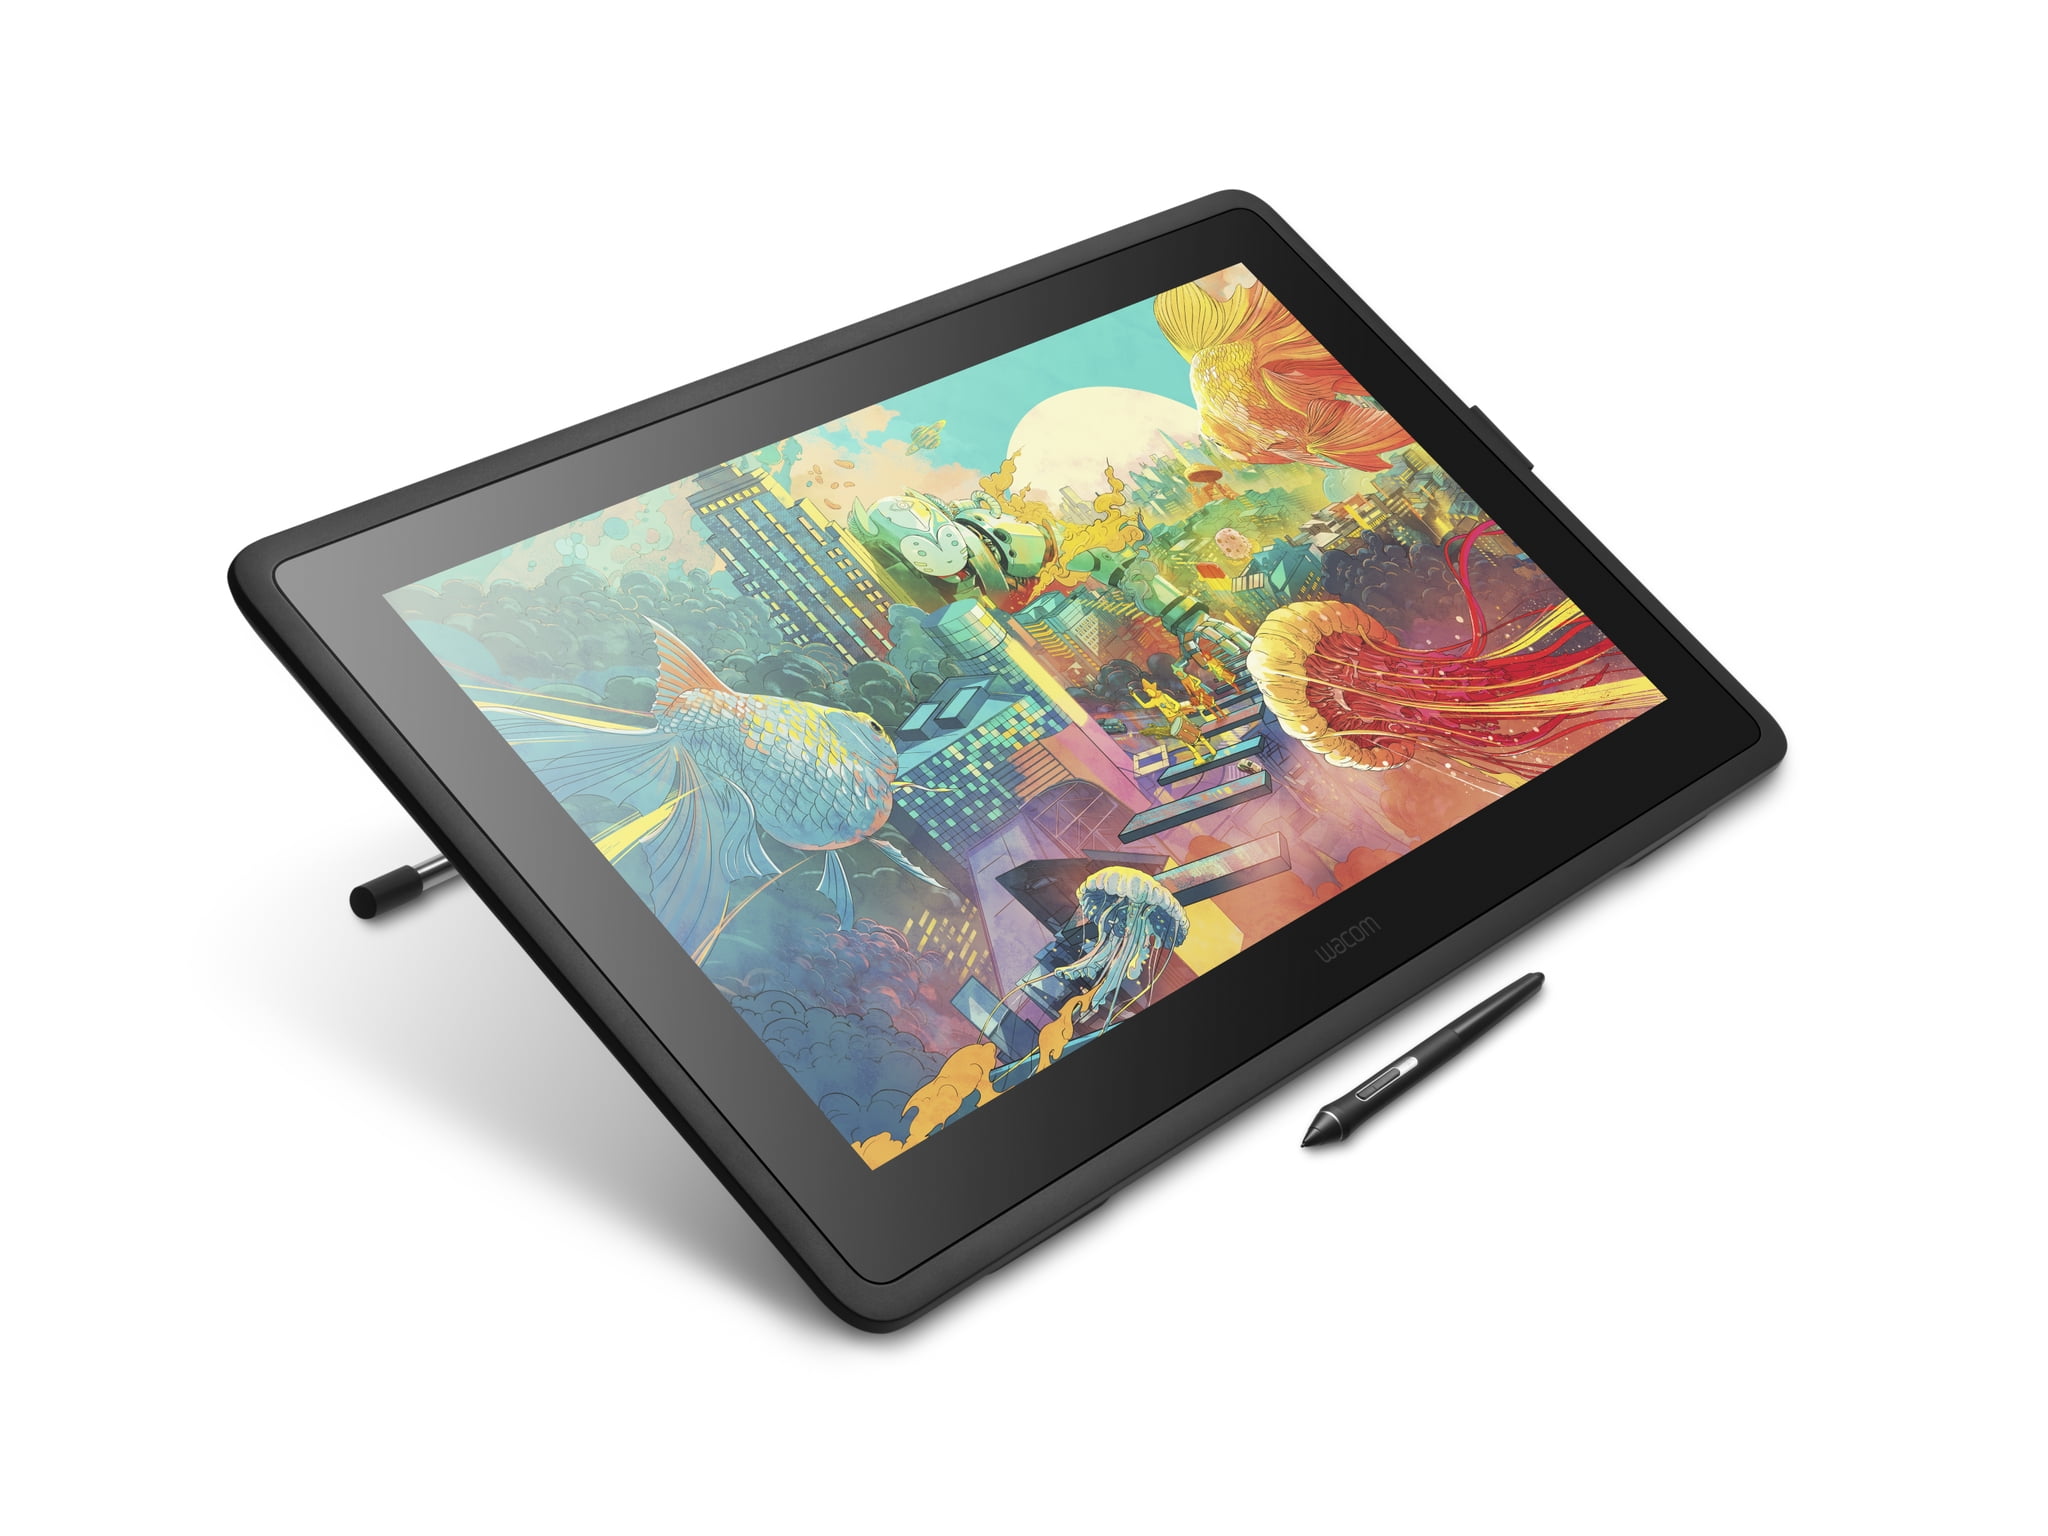 Wacom Cintiq 22 Graphics Drawing Tablet with Screen (DTK2260K0A